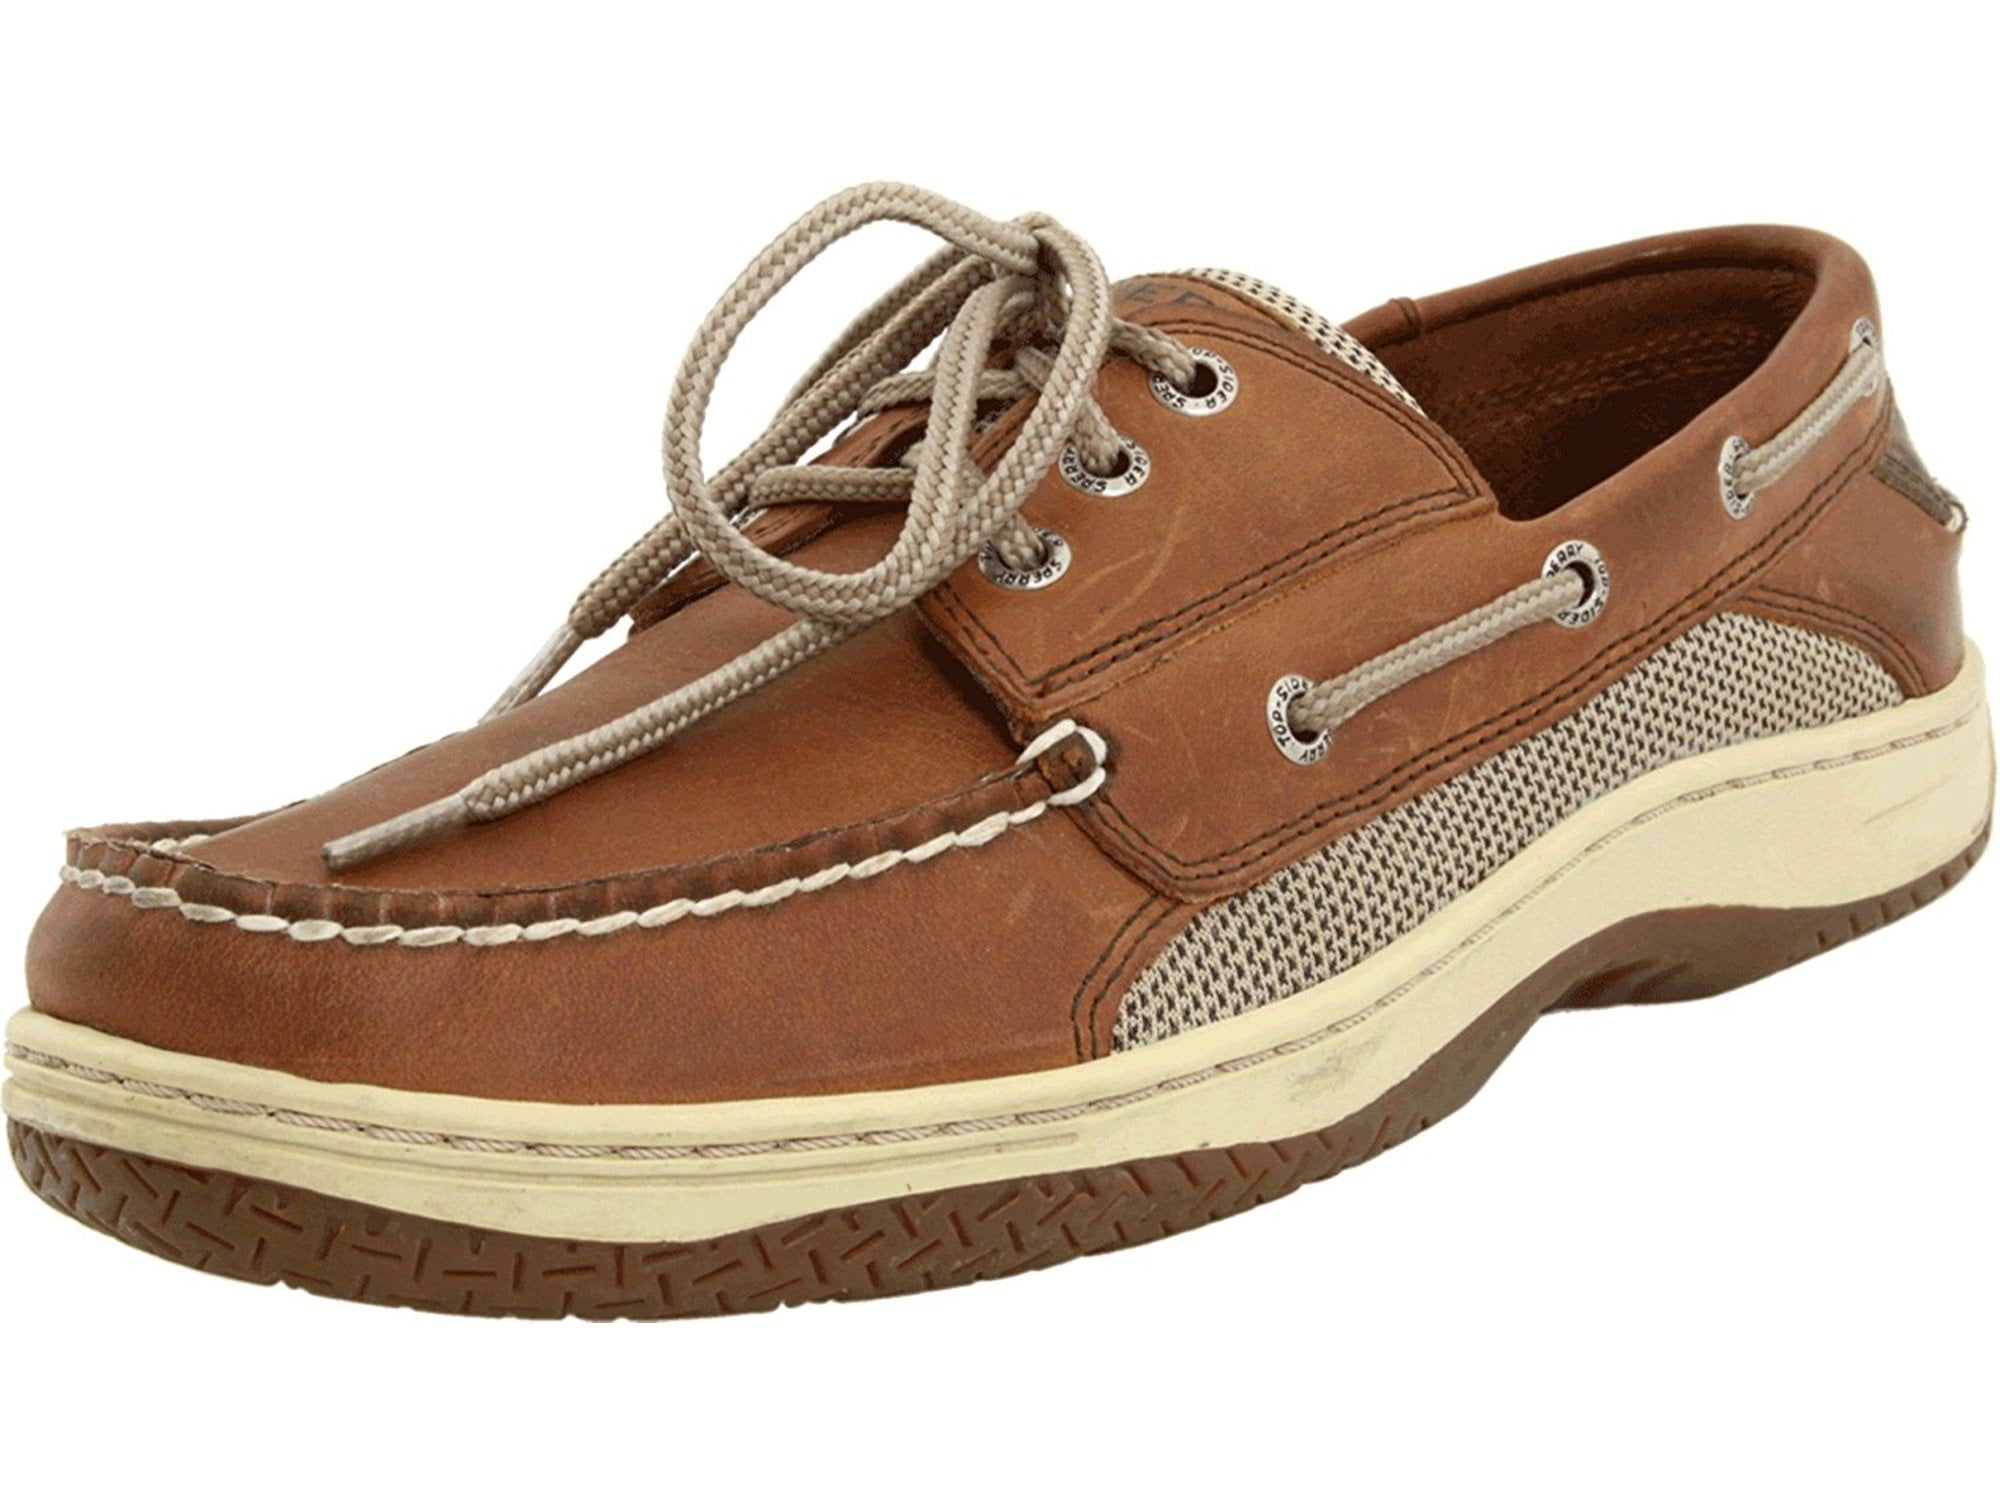 sperry men's leather boat shoes